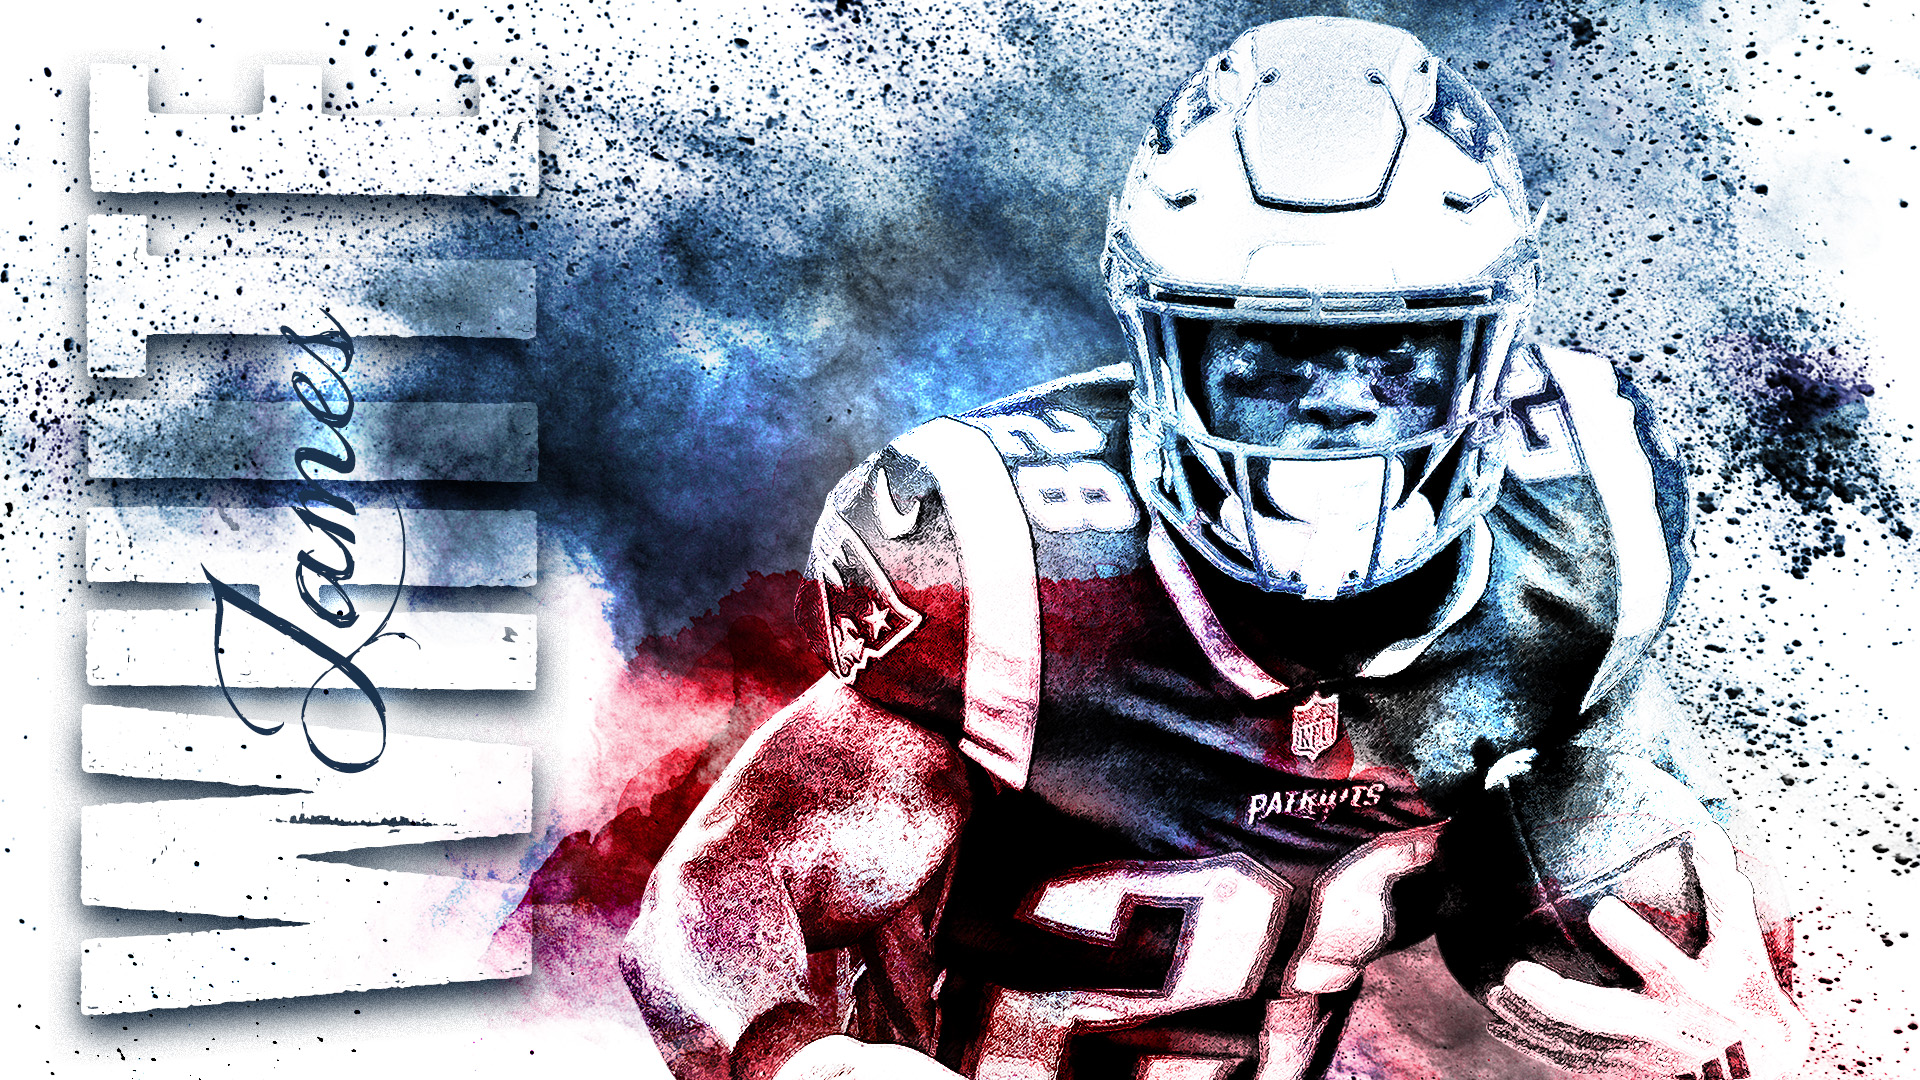 Official website of the New England Patriots1920 x 1080